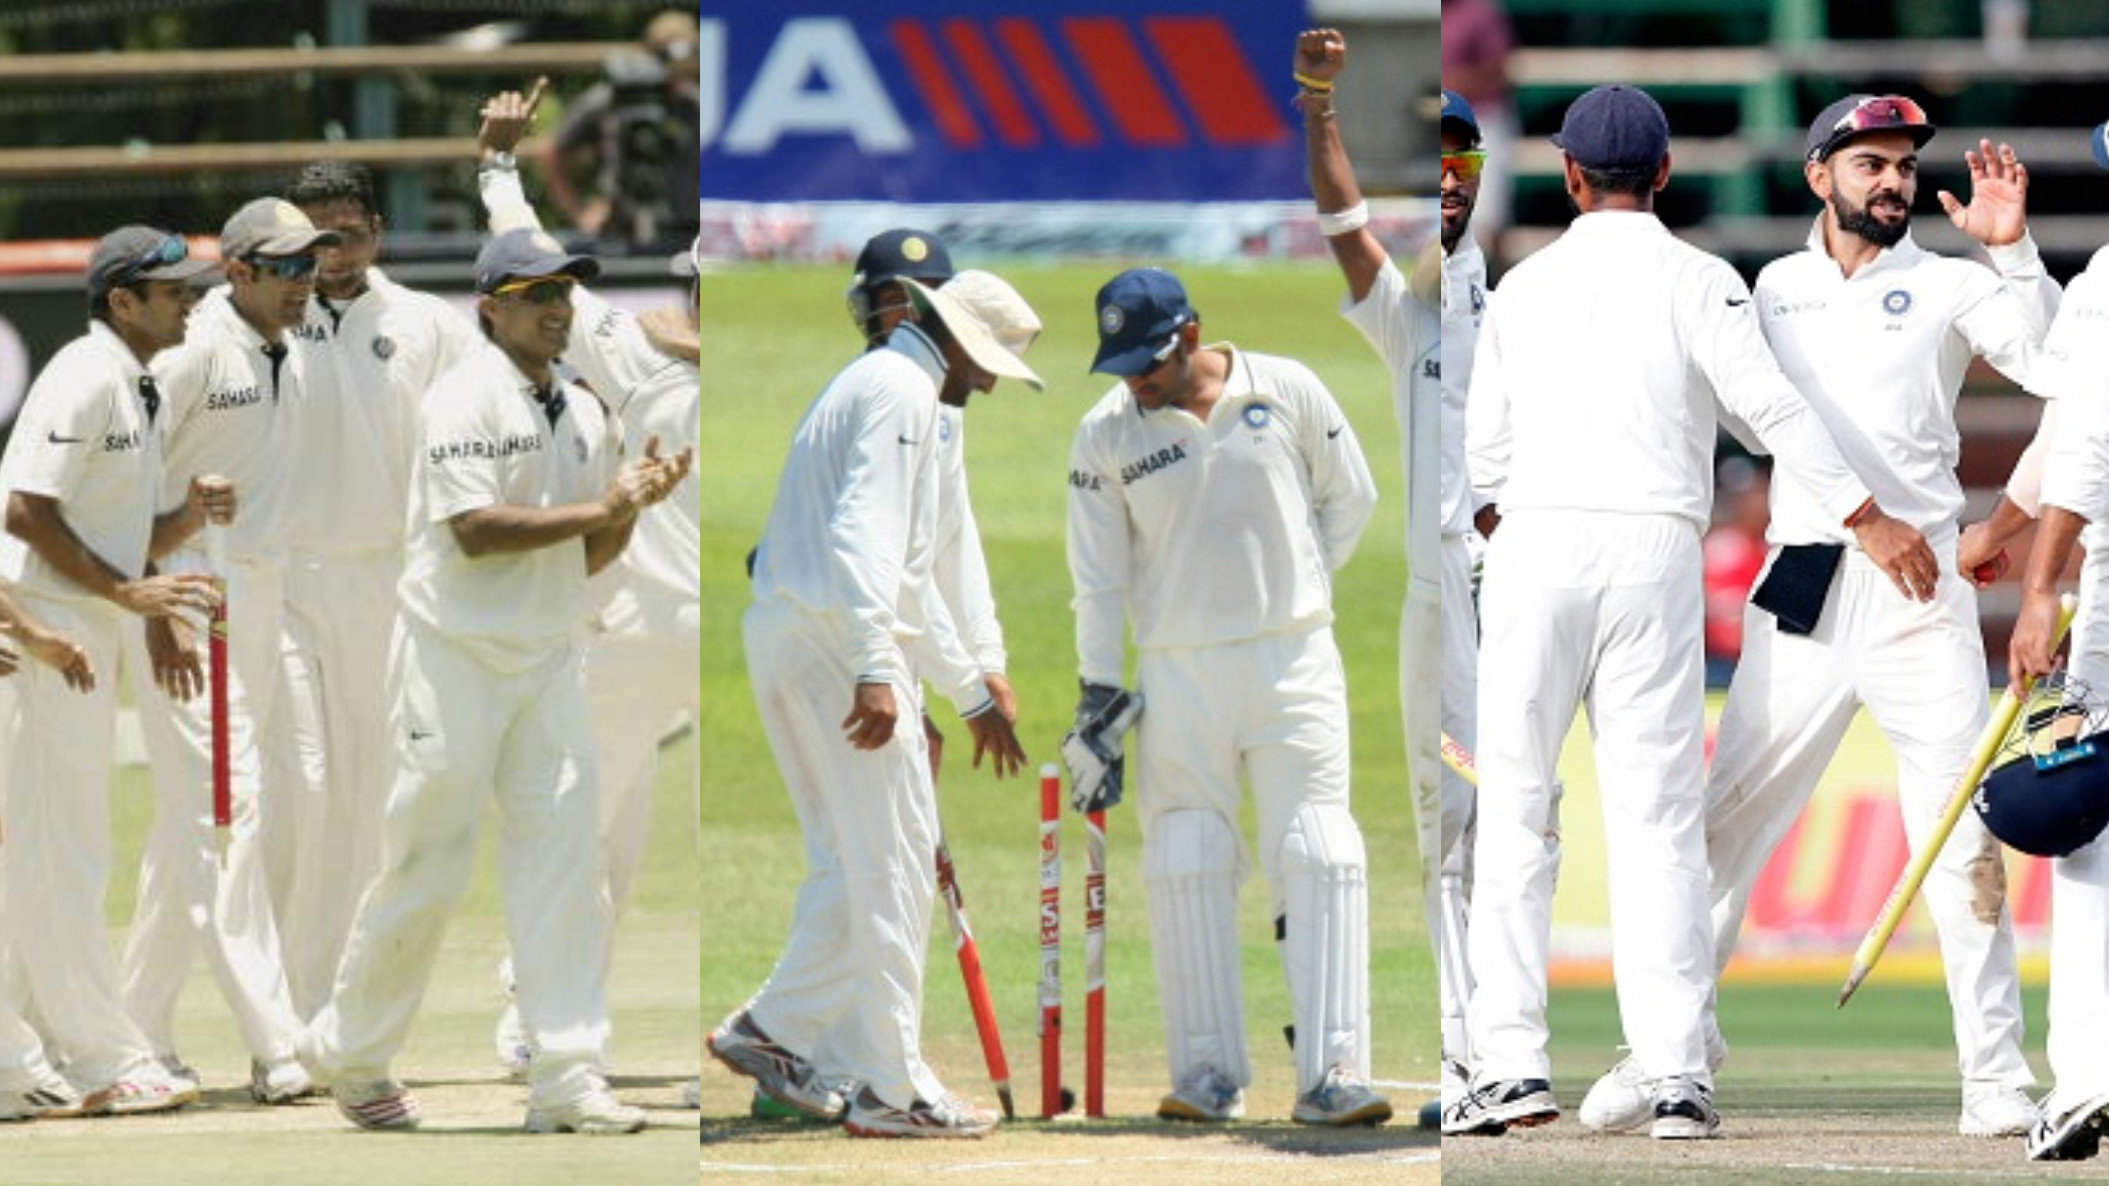 SA v IND 2021-22: A look back at India’s three Test match wins in South Africa